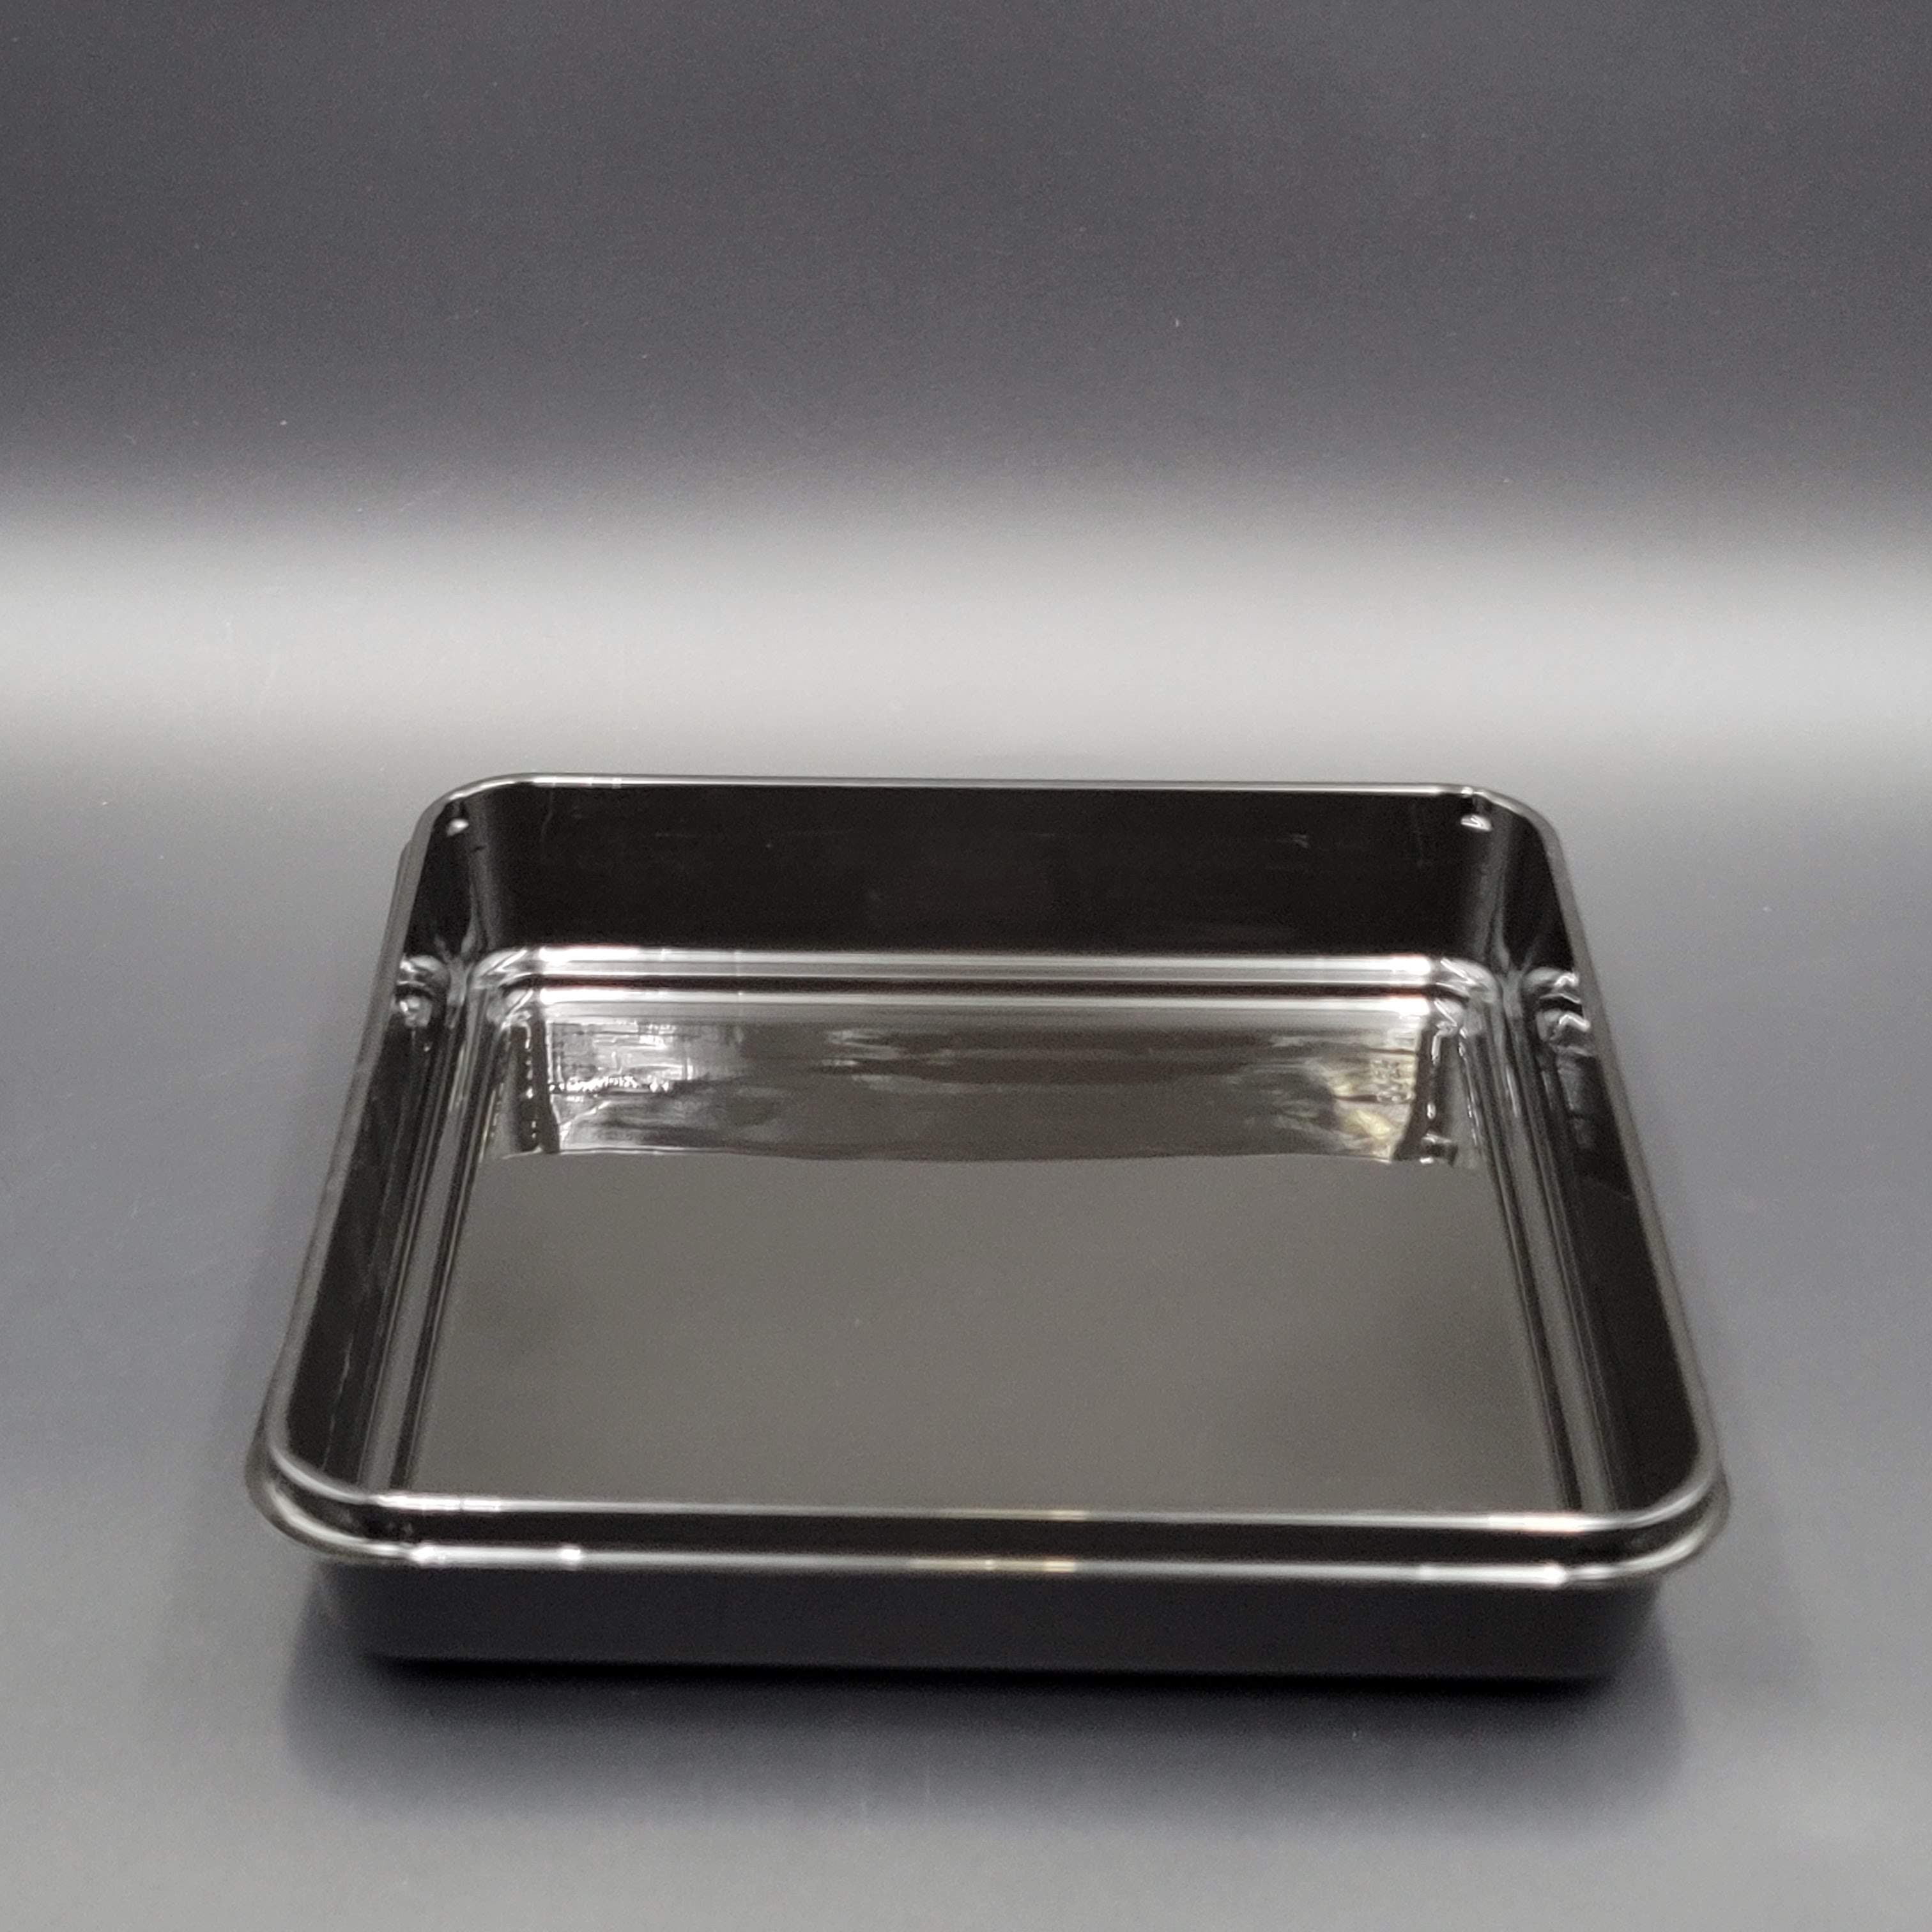 Anchor Packaging Plastic Executive Square Meal Base Black 4028218 - 100/Case